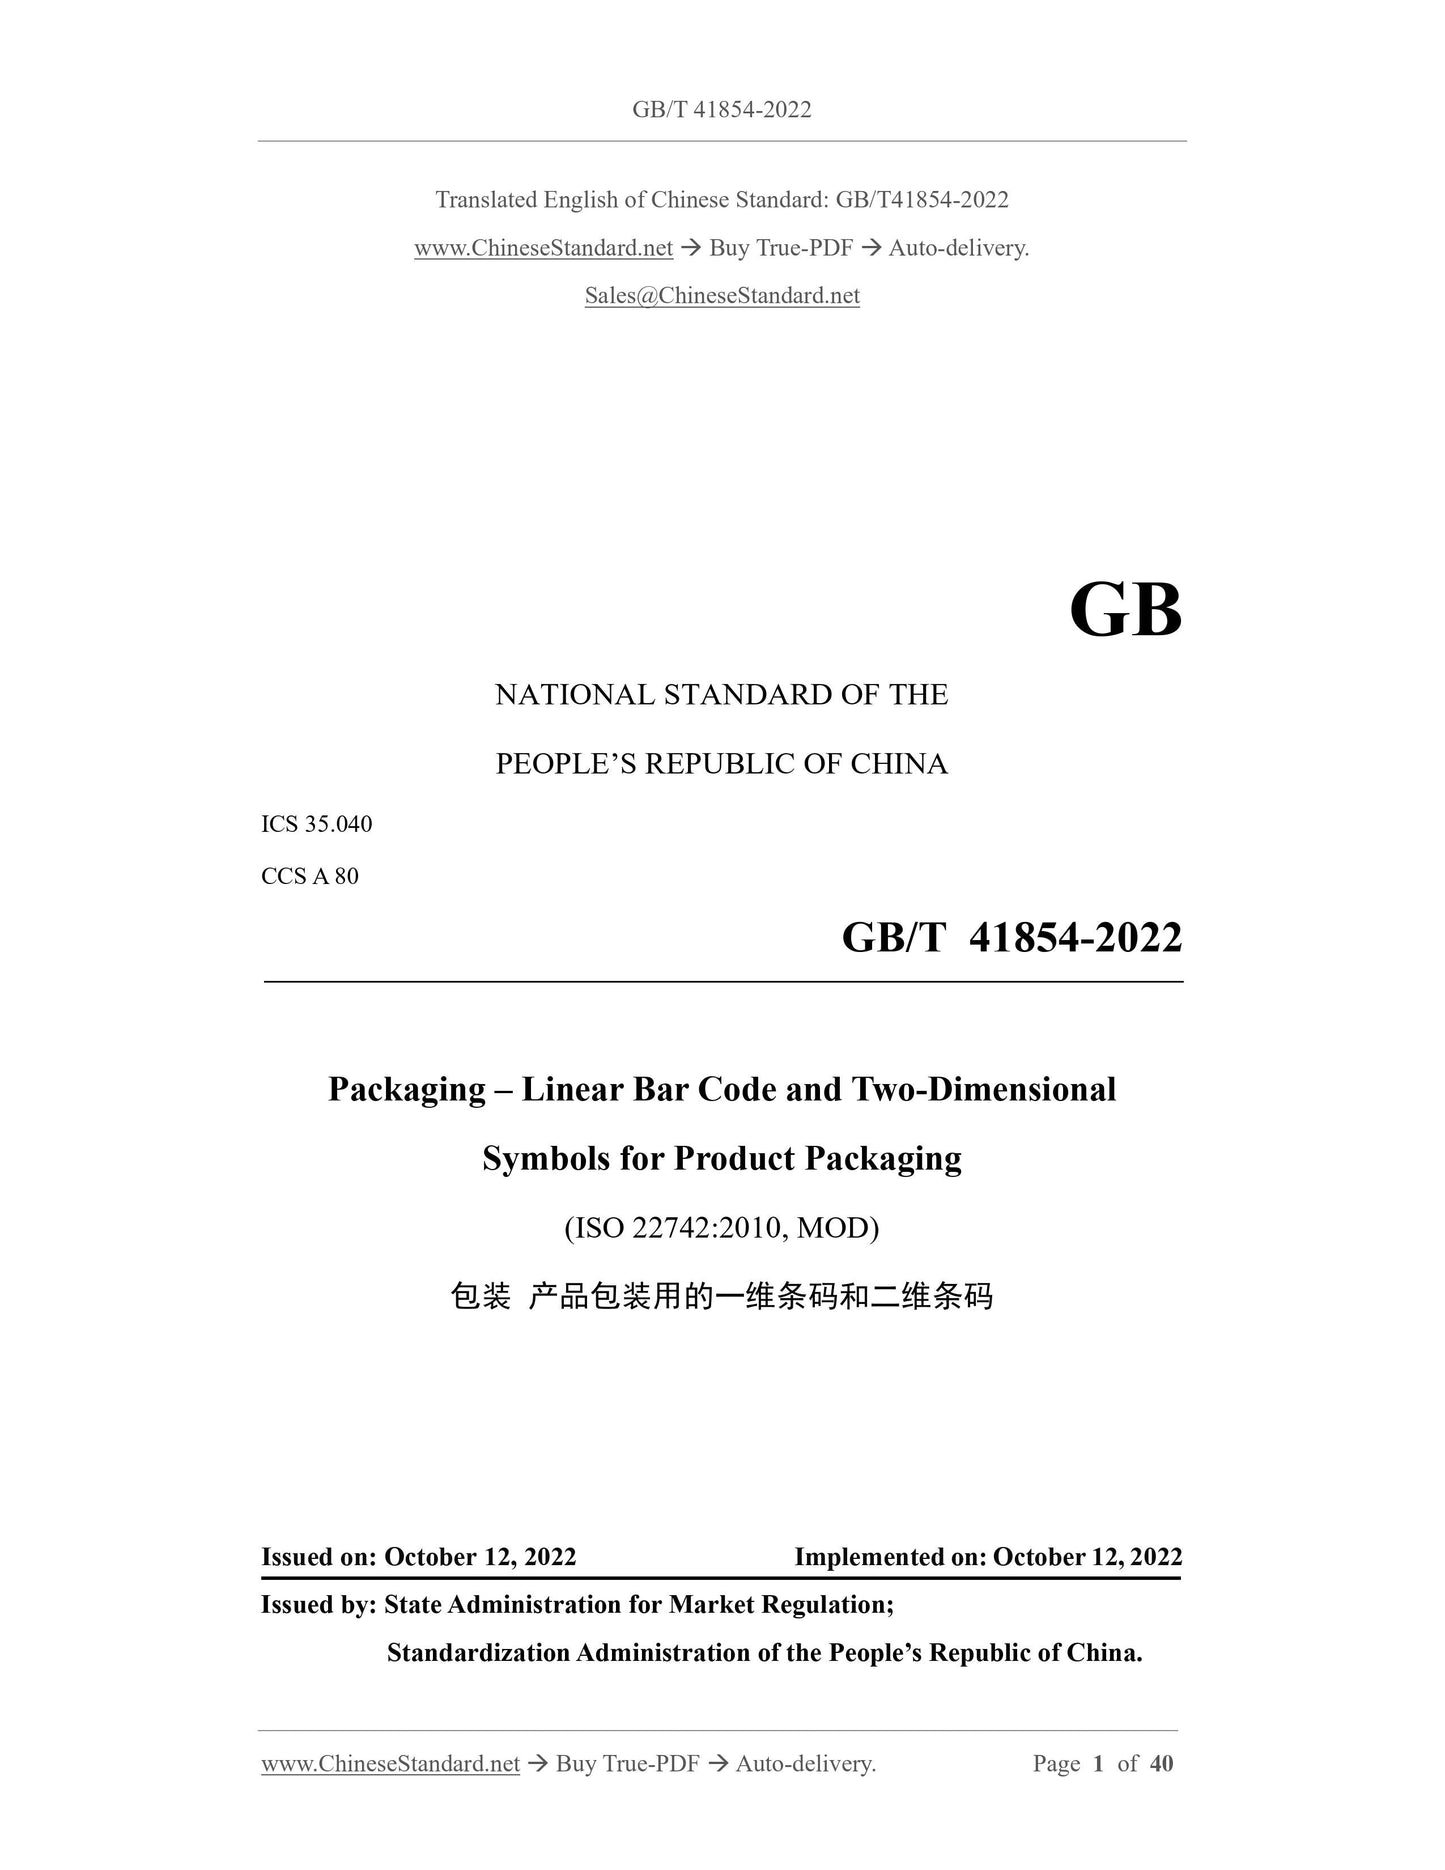 GB/T 41854-2022 Page 1